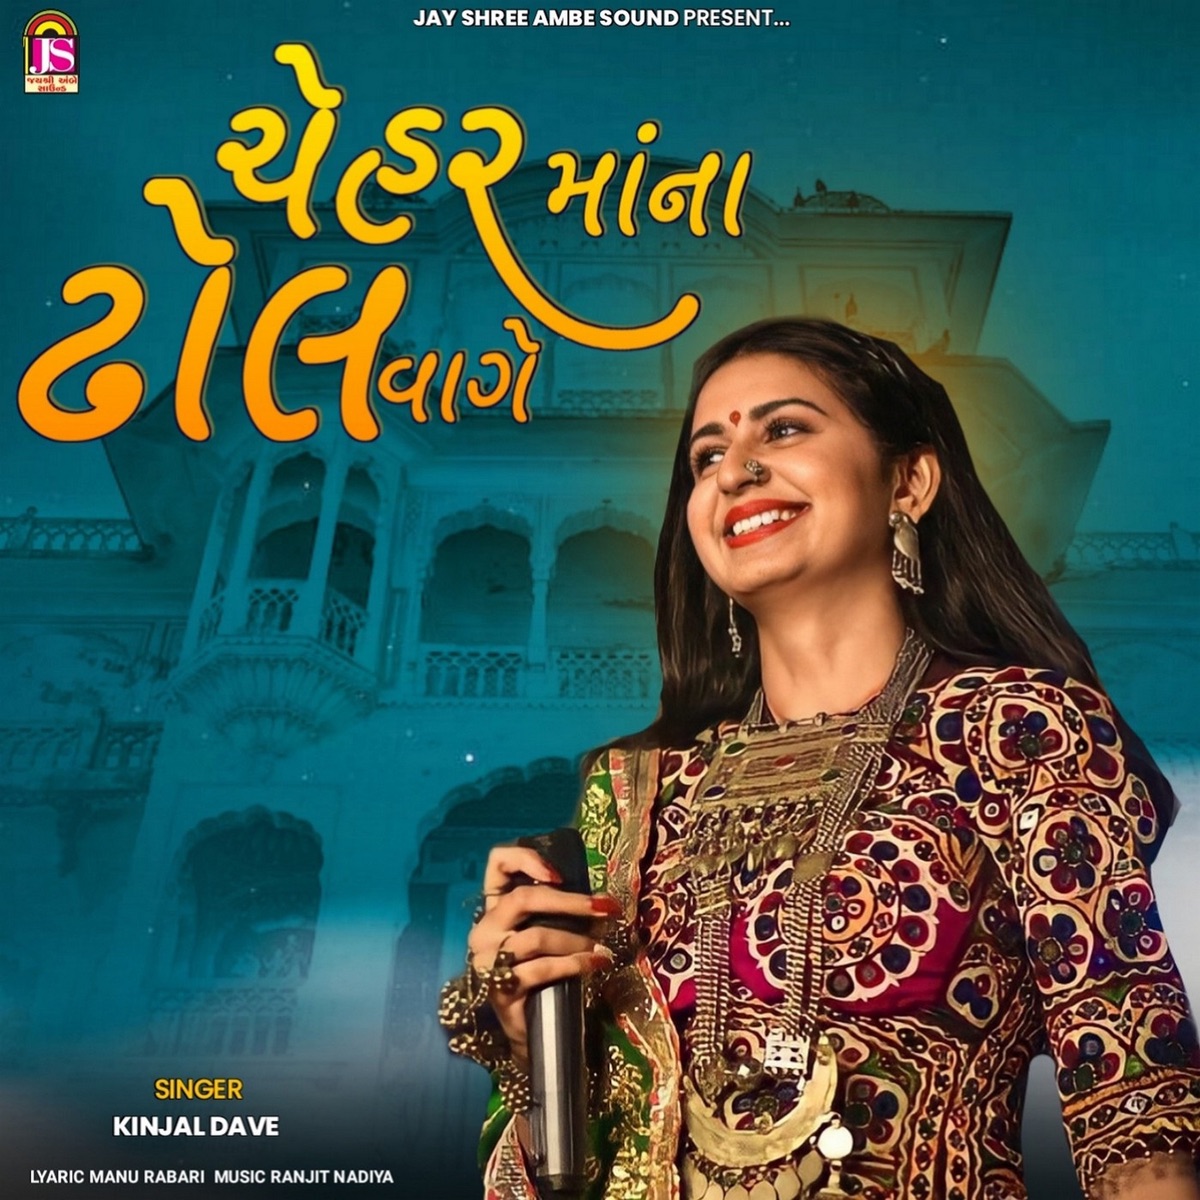 Kinjal Dave Hit Songs by Kinjal Dave on Apple Music